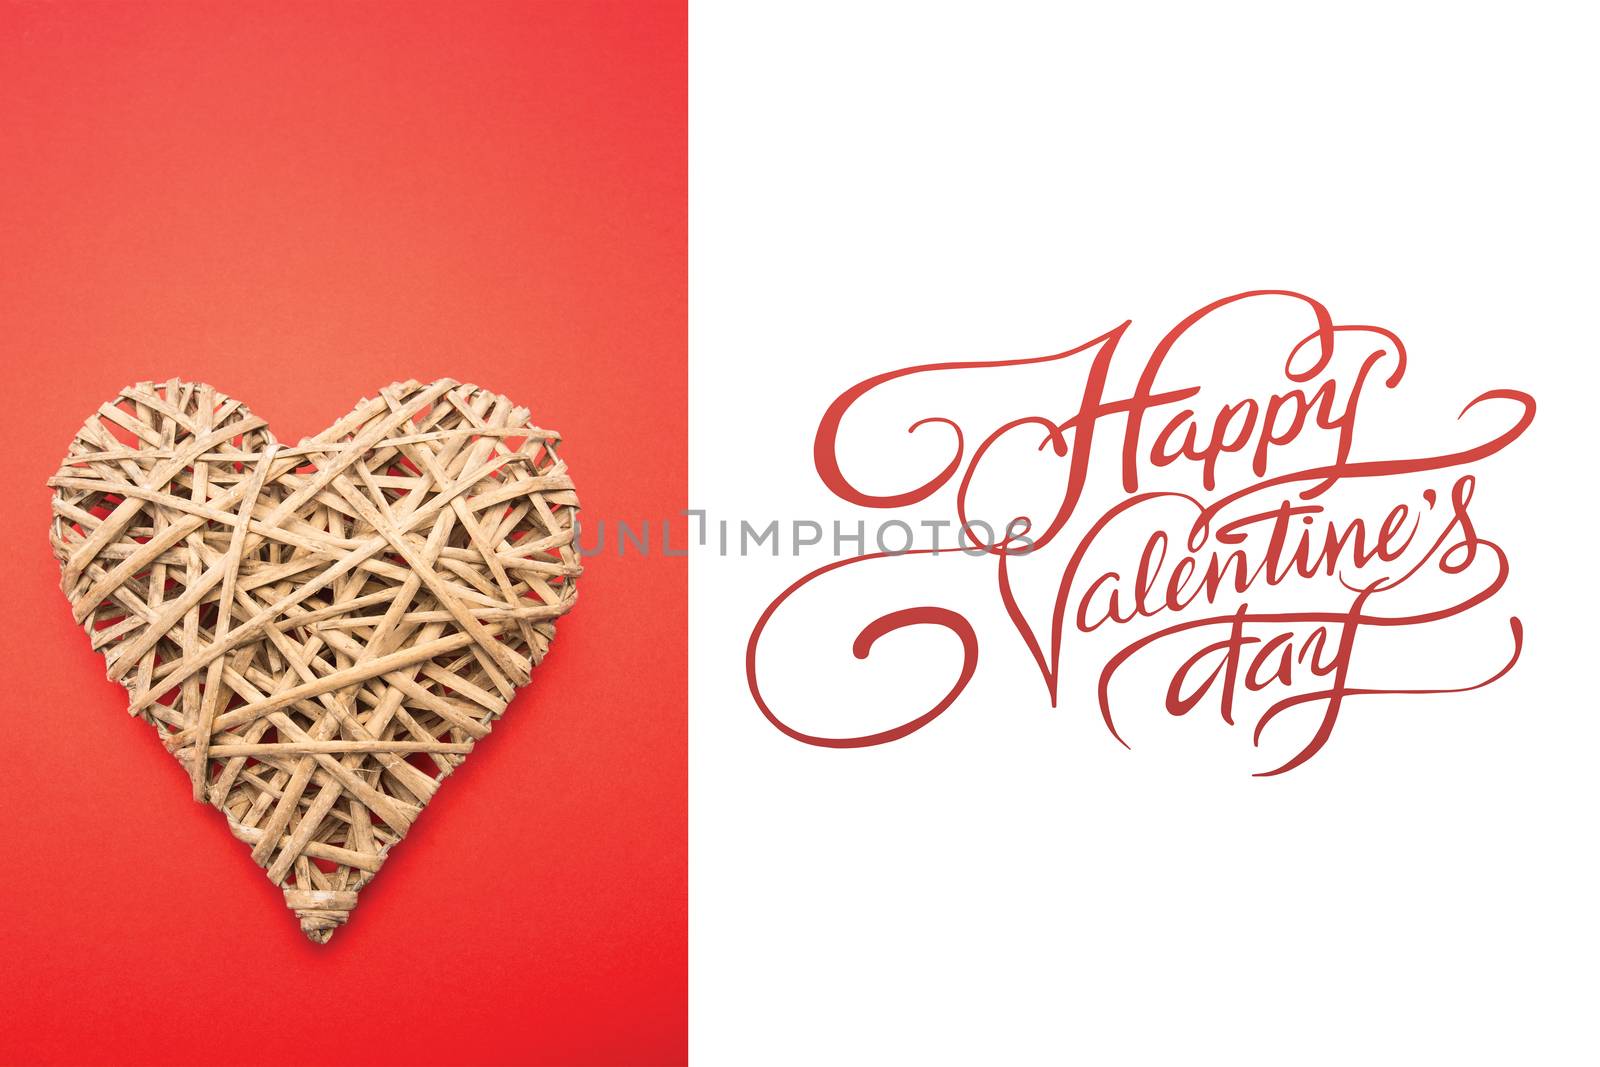 Wicker heart ornament  against happy valentines day